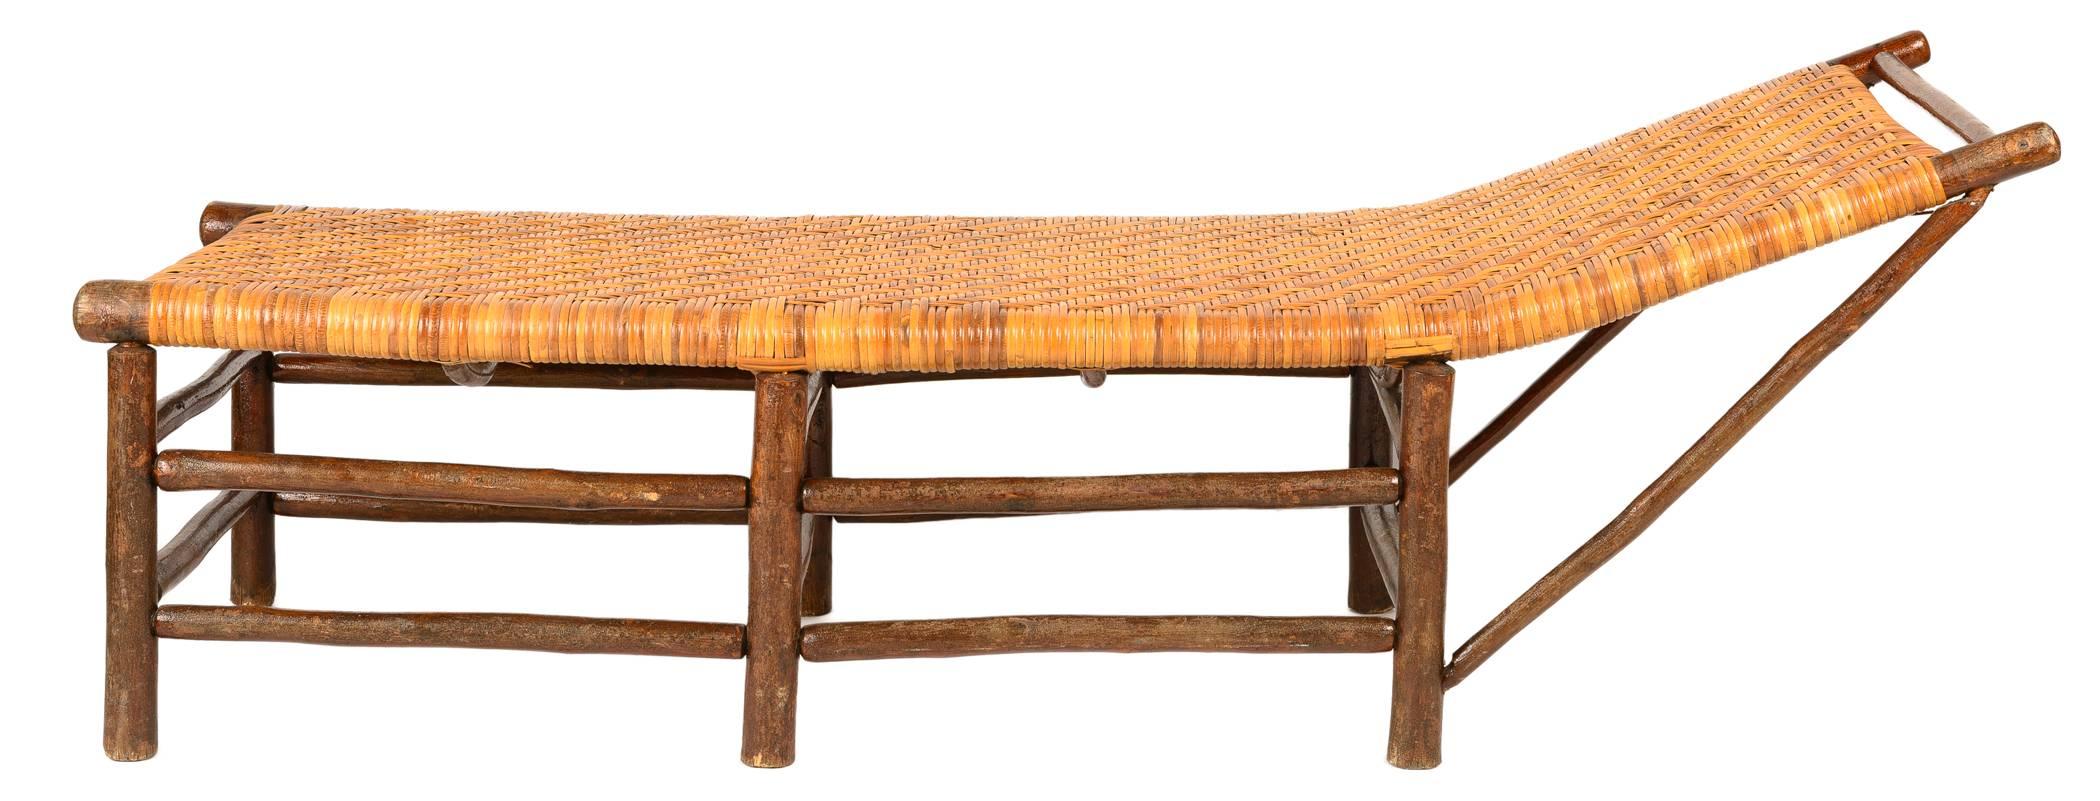 The Hickory chaise has an intricately woven cane seat and bold legs and stretchers. The construction is very sturdy and comfortable. It is a very appealing piece for a beach cottage or rustic cabin.